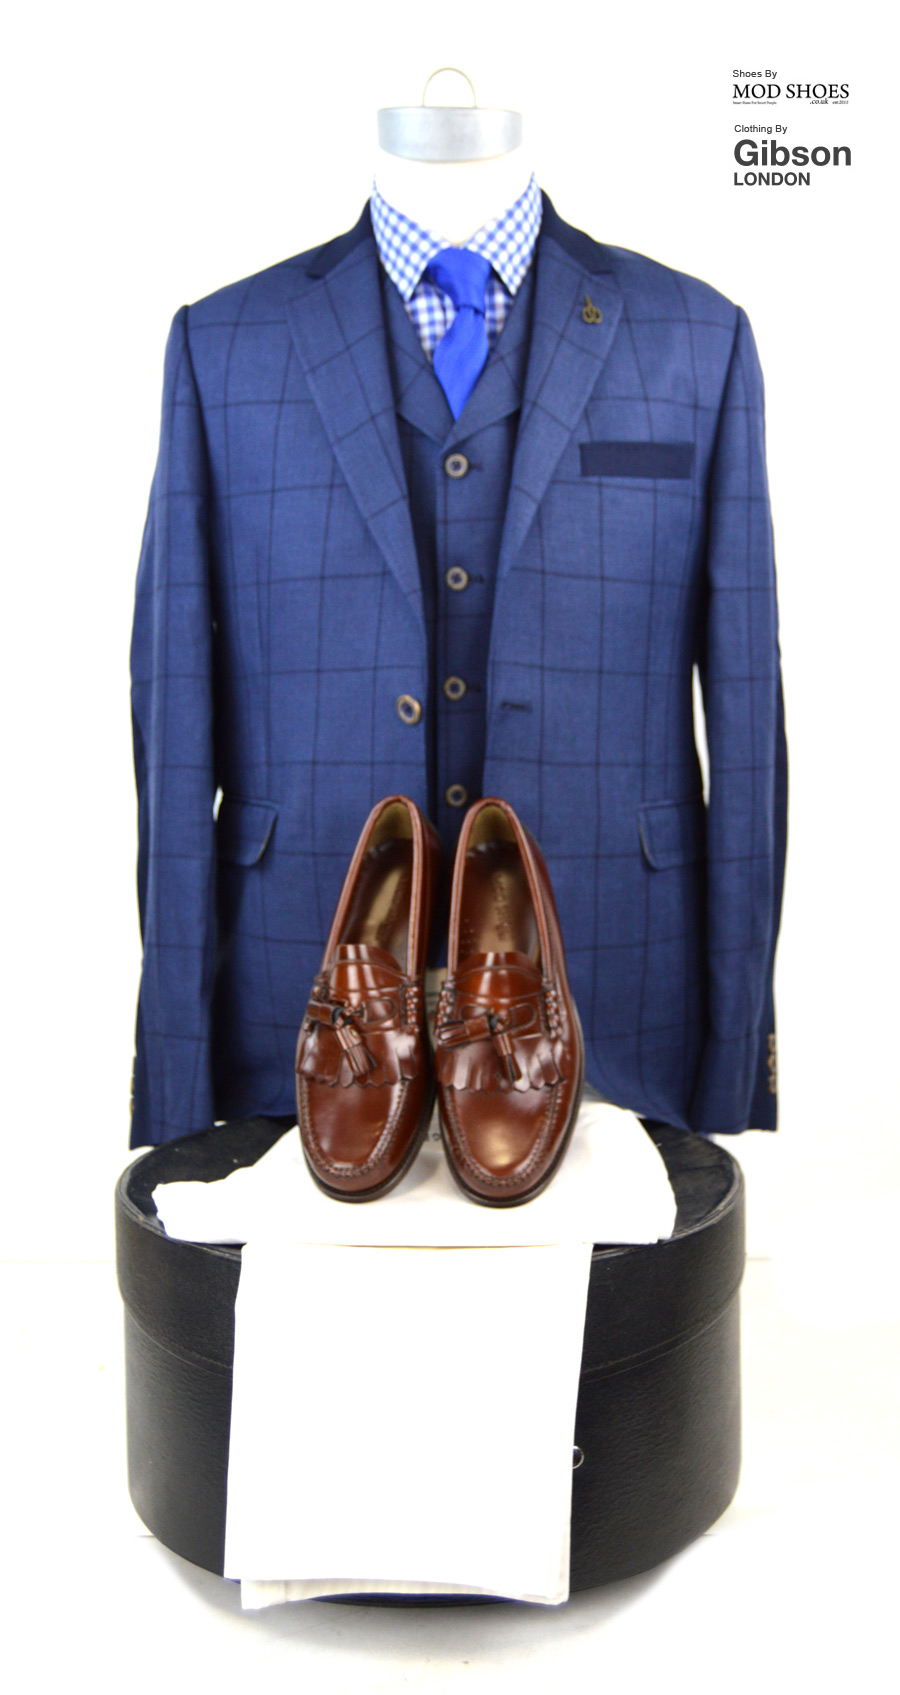 modshoes-with-chestnut-dukes-with-gibson-jacket